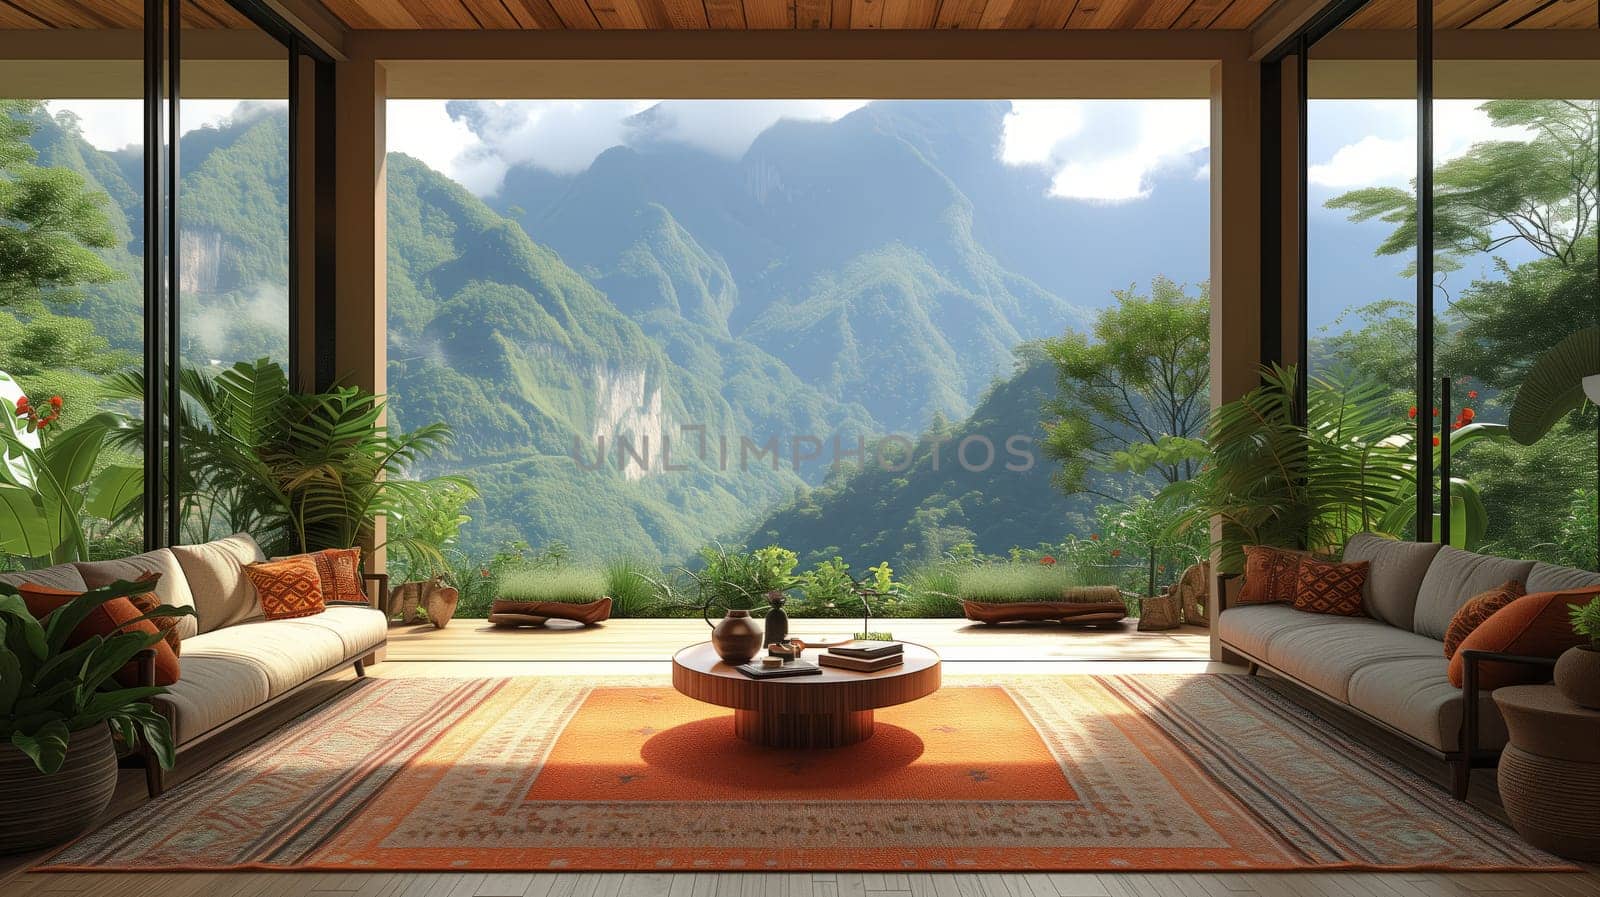 Living room featuring a view of a mountain range through the window by richwolf